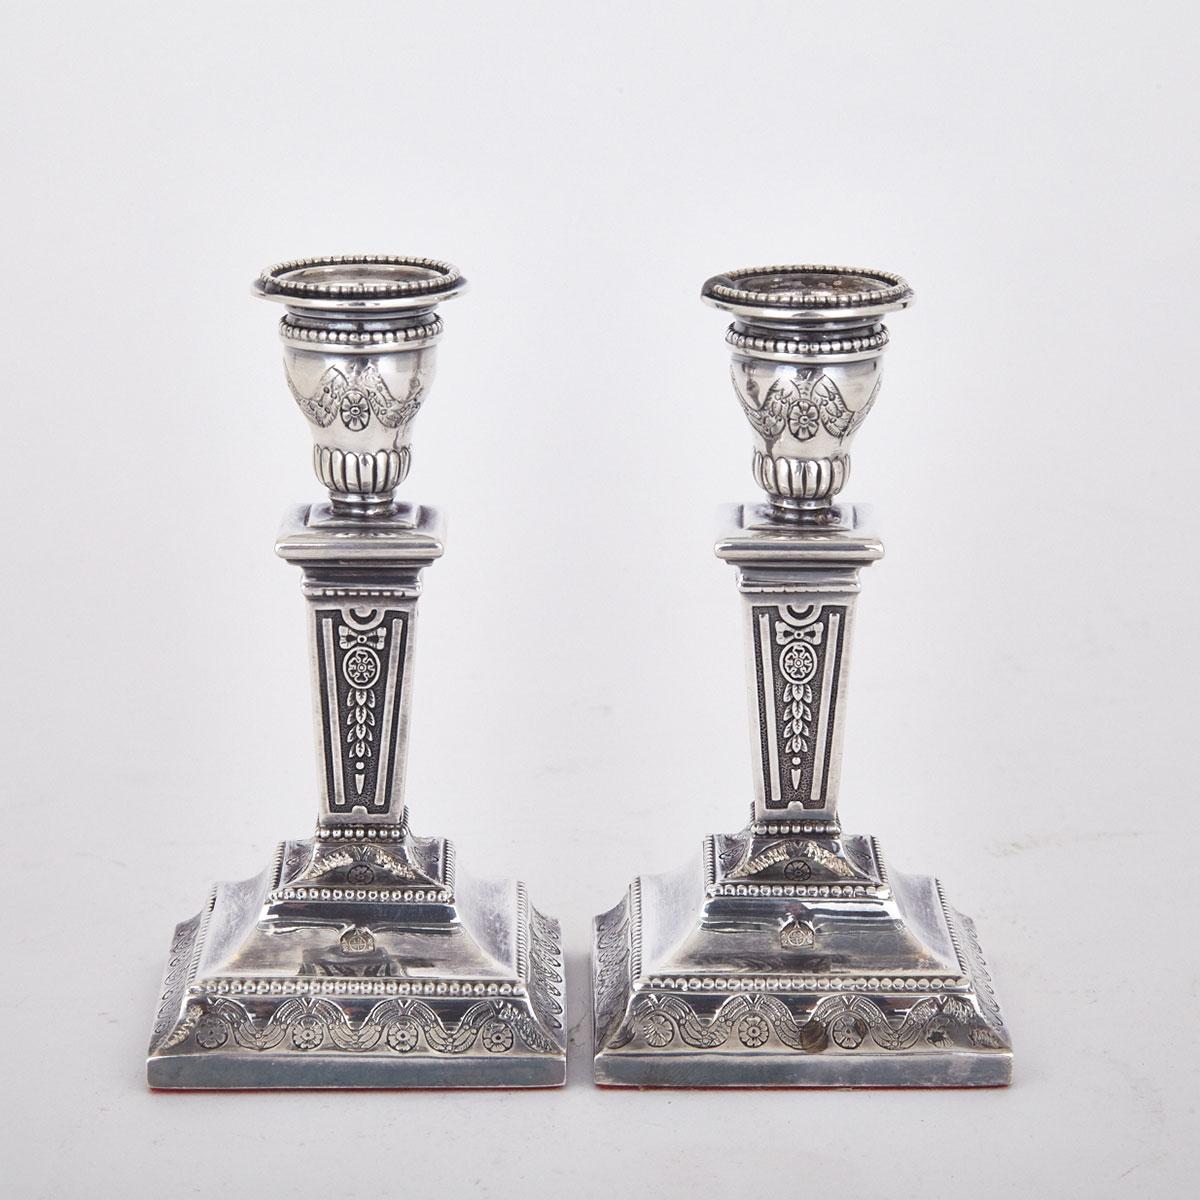 Pair of Continental Silver Small Candlesticks, probably Austrian, 20th century